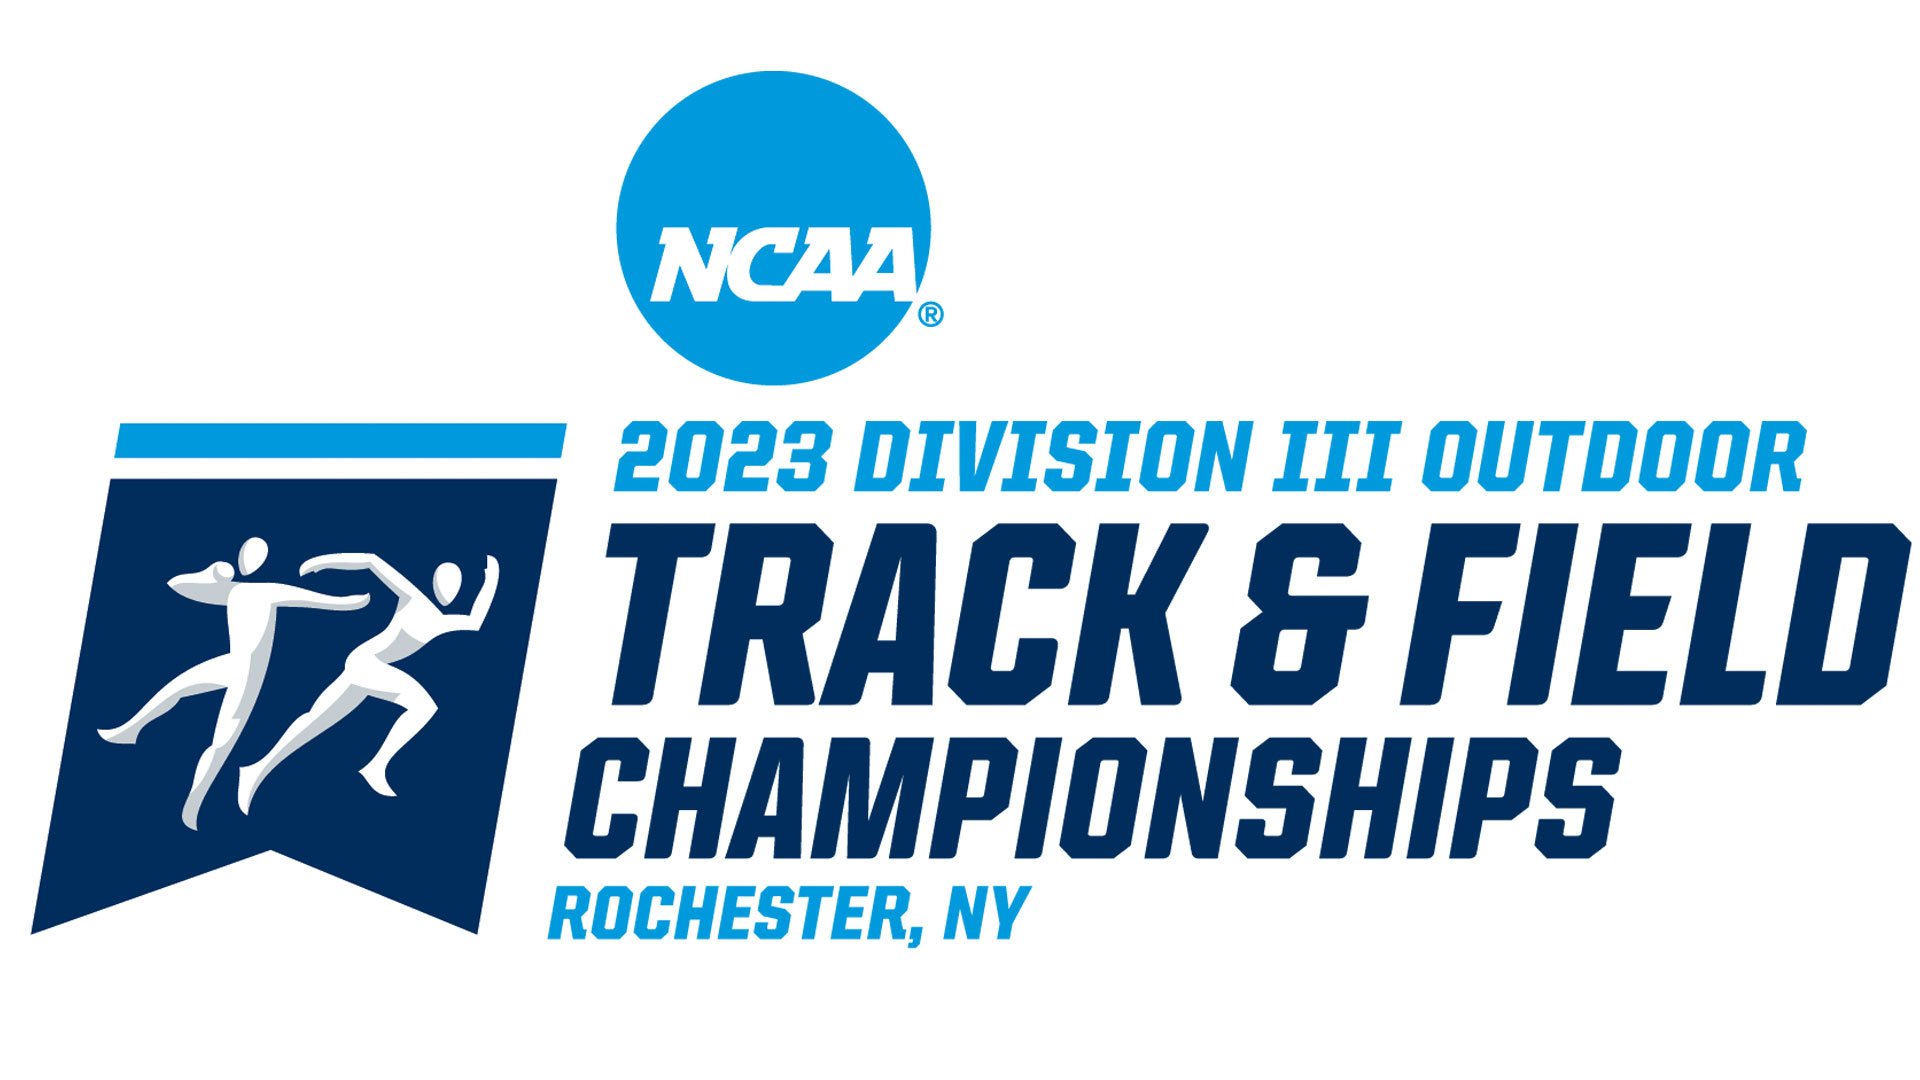 Barre Repeats as Invitee to NCAA Women&rsquo;s Outdoor Track and Field Championships